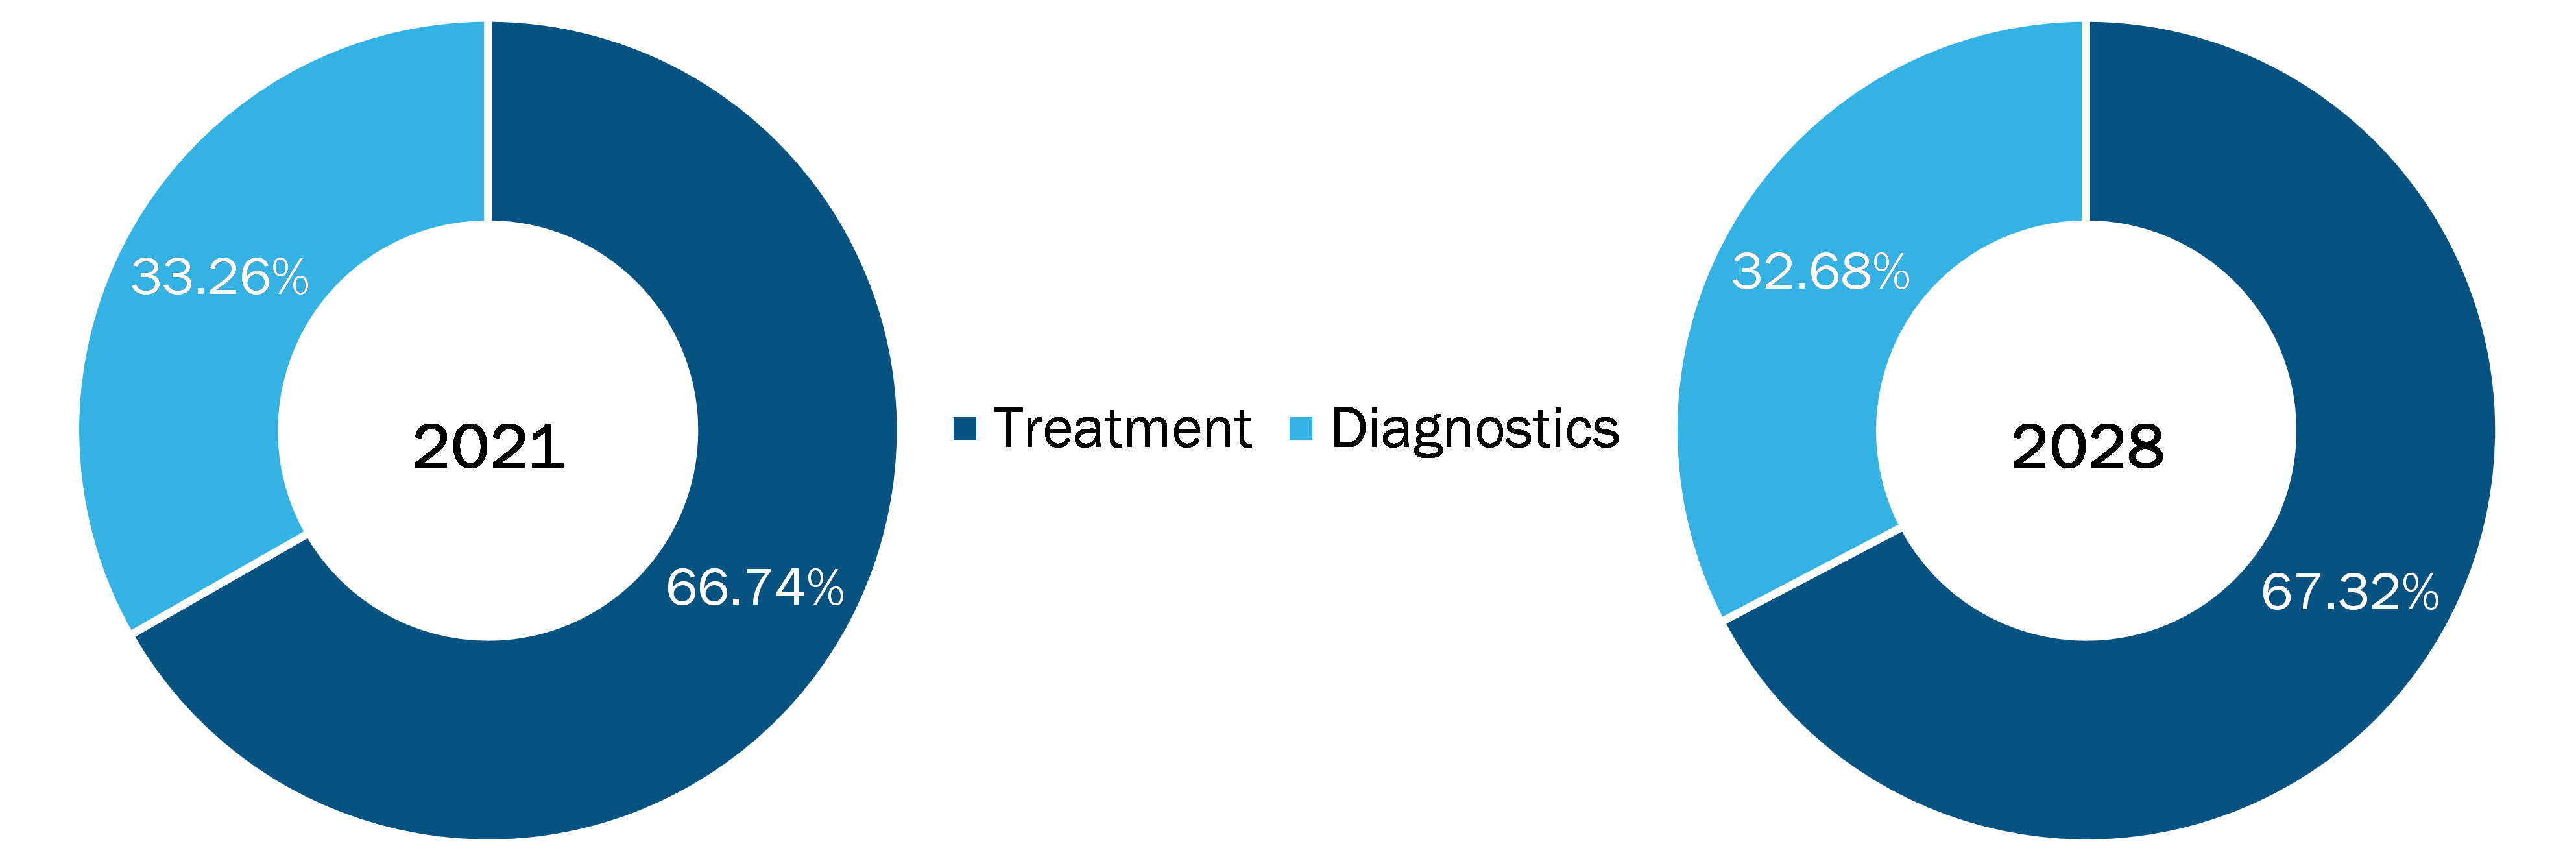 Homocystinuria Market, by Method – 2021 and 2028